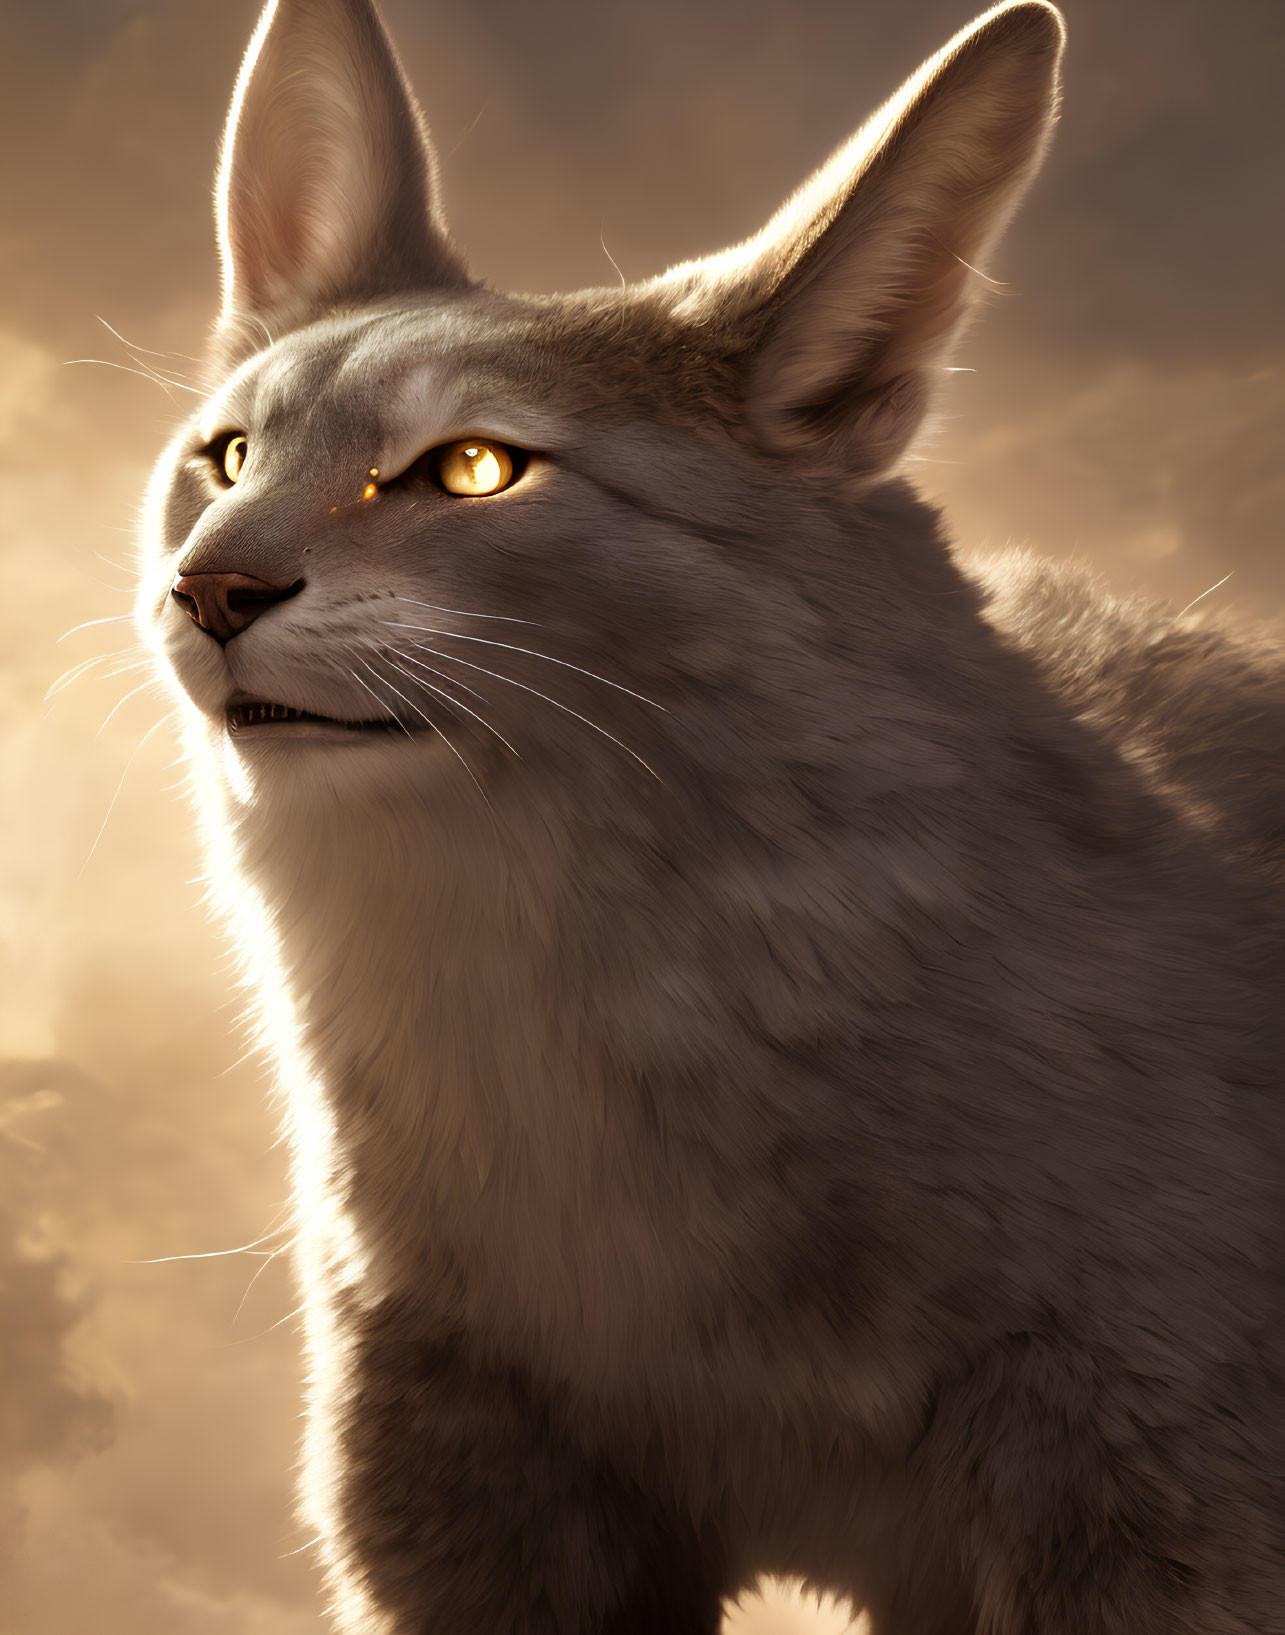 Realistic digital artwork of majestic cat with piercing amber eyes and warm backlight.